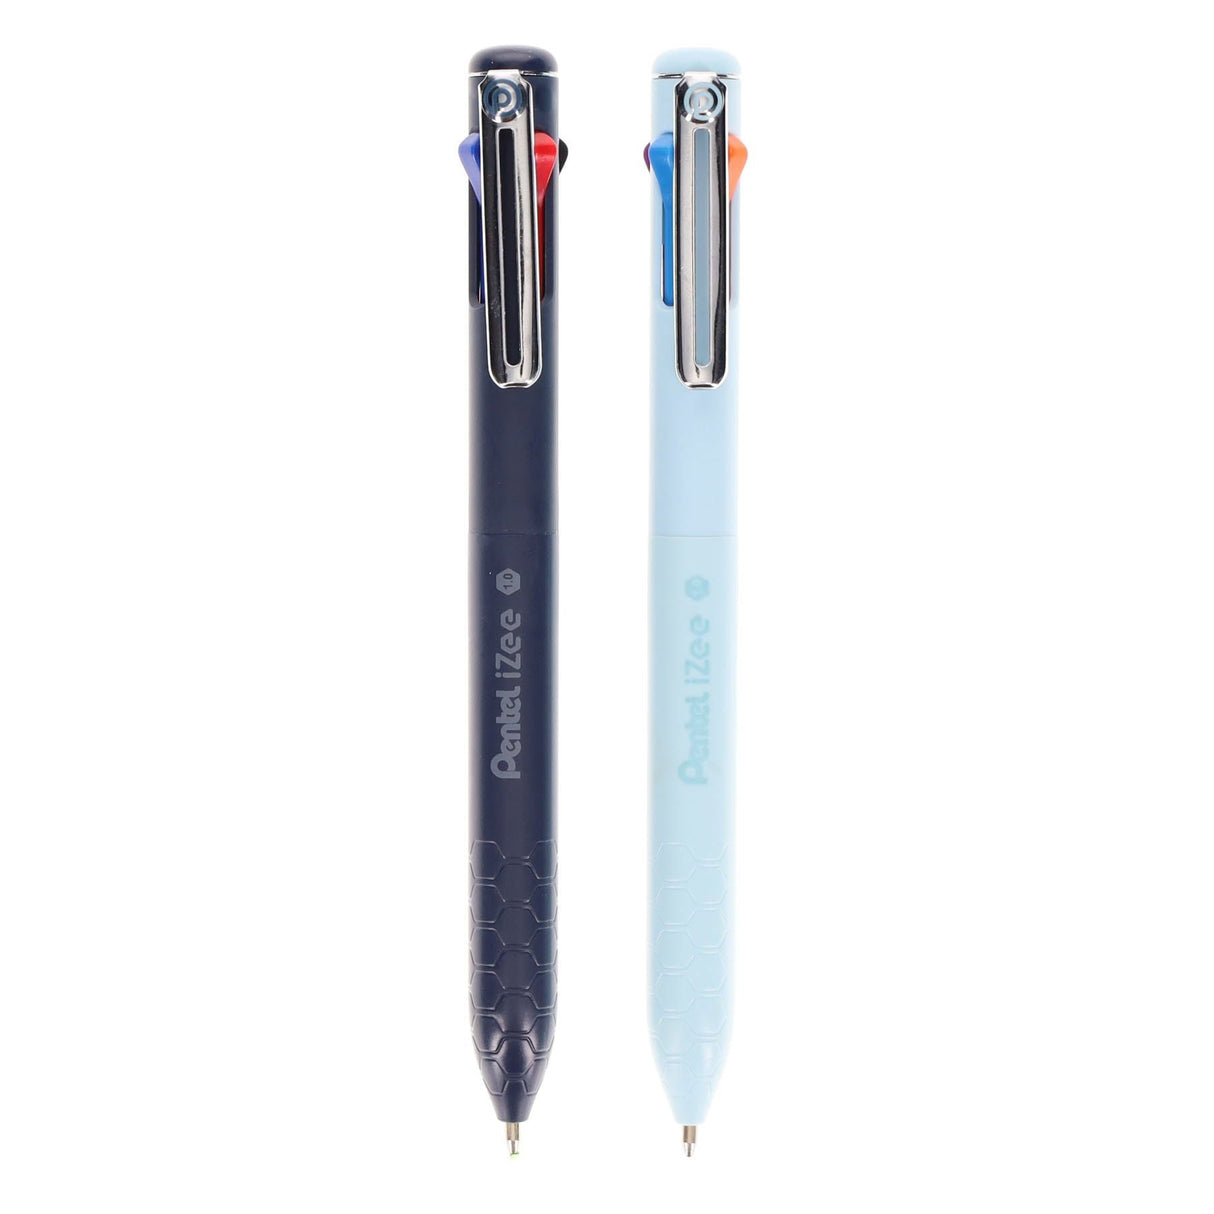 Pentel Izee 1.0mm 4 Colour Retractable Ballpoint Pen Assorted - Pack of 2 | Stationery Shop UK